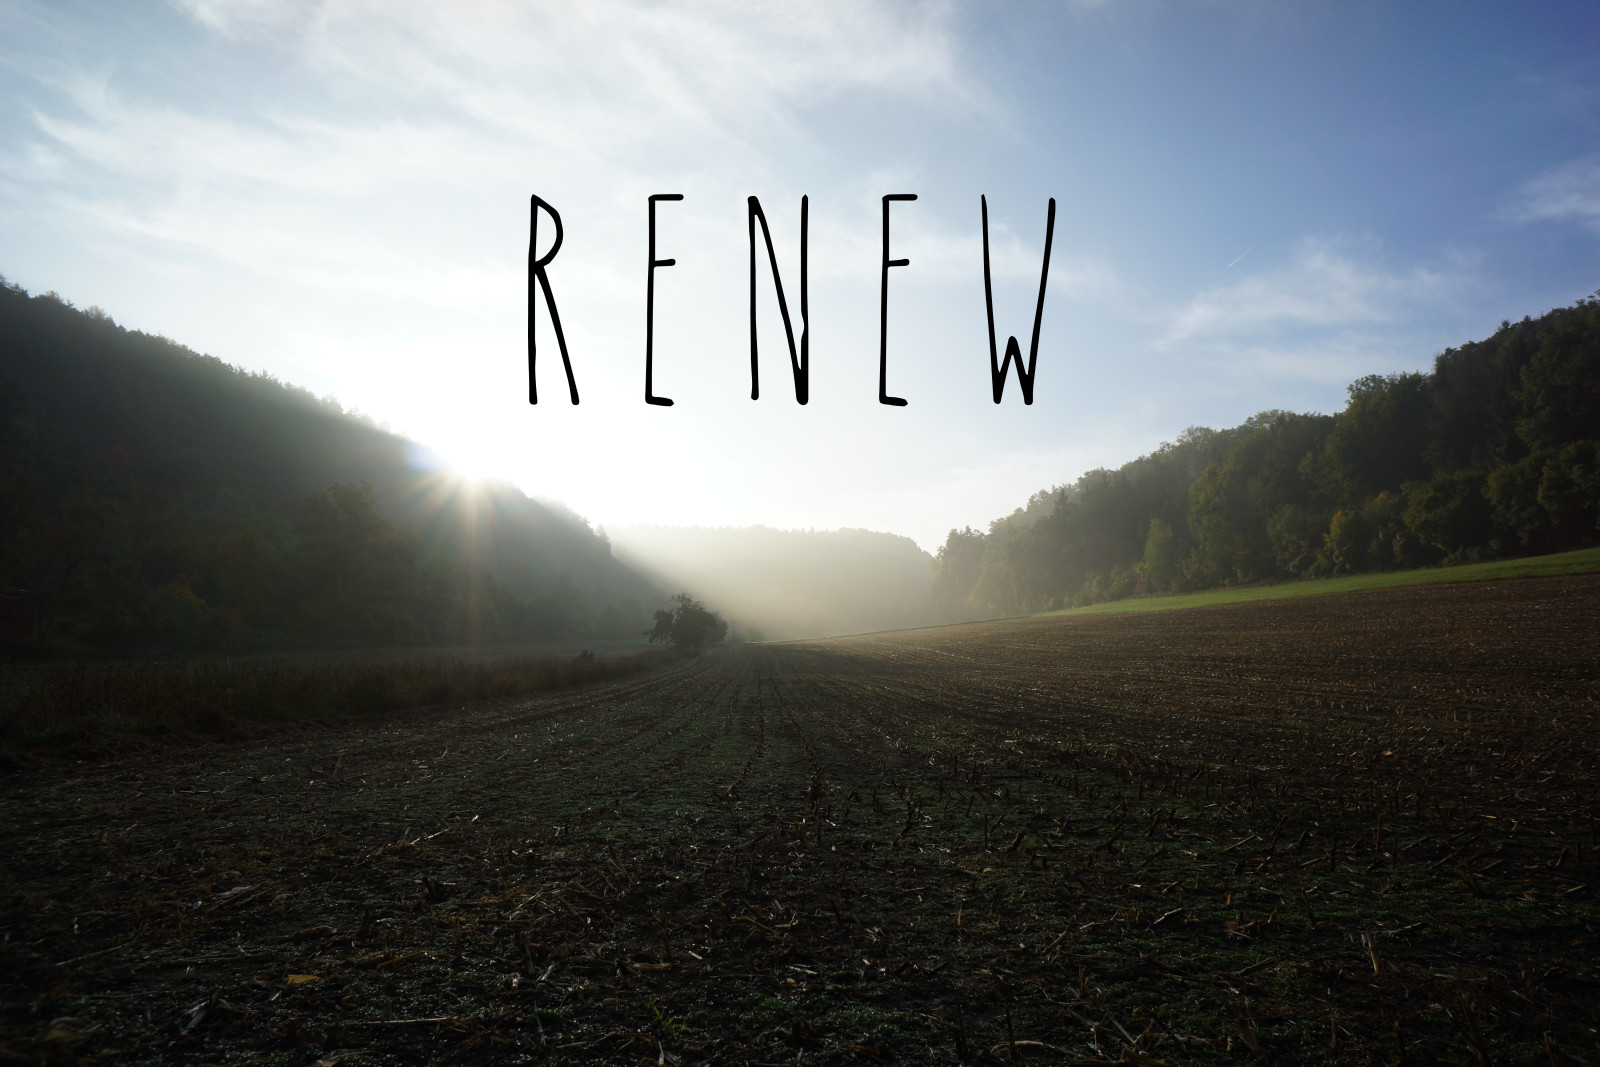 Renew and Refresh